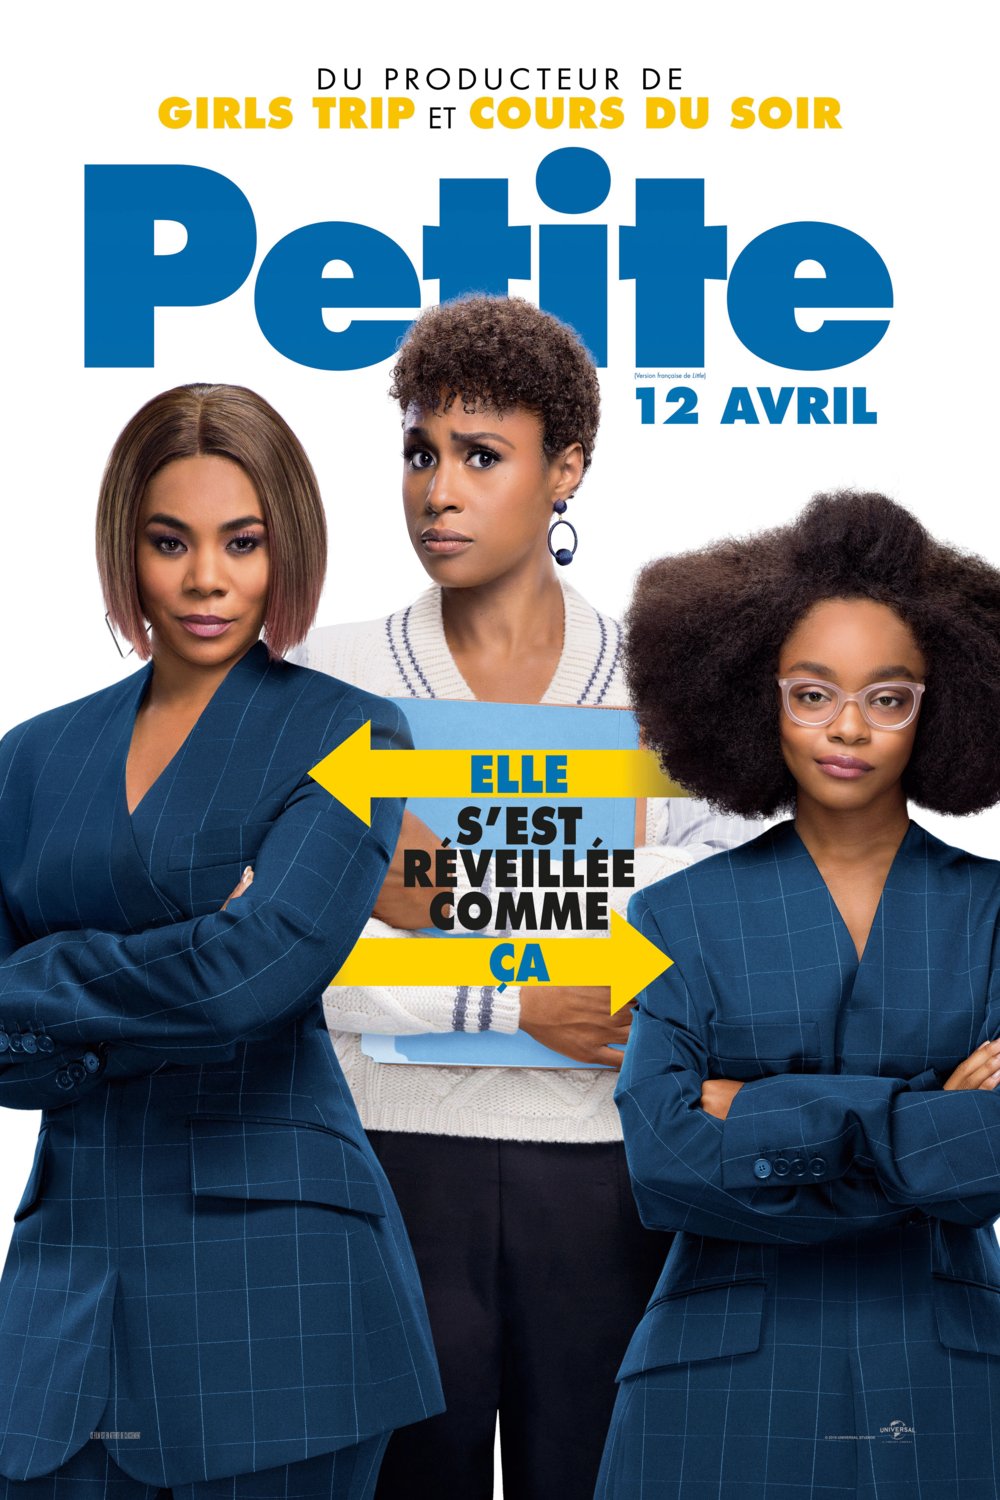 Poster of the movie Petite